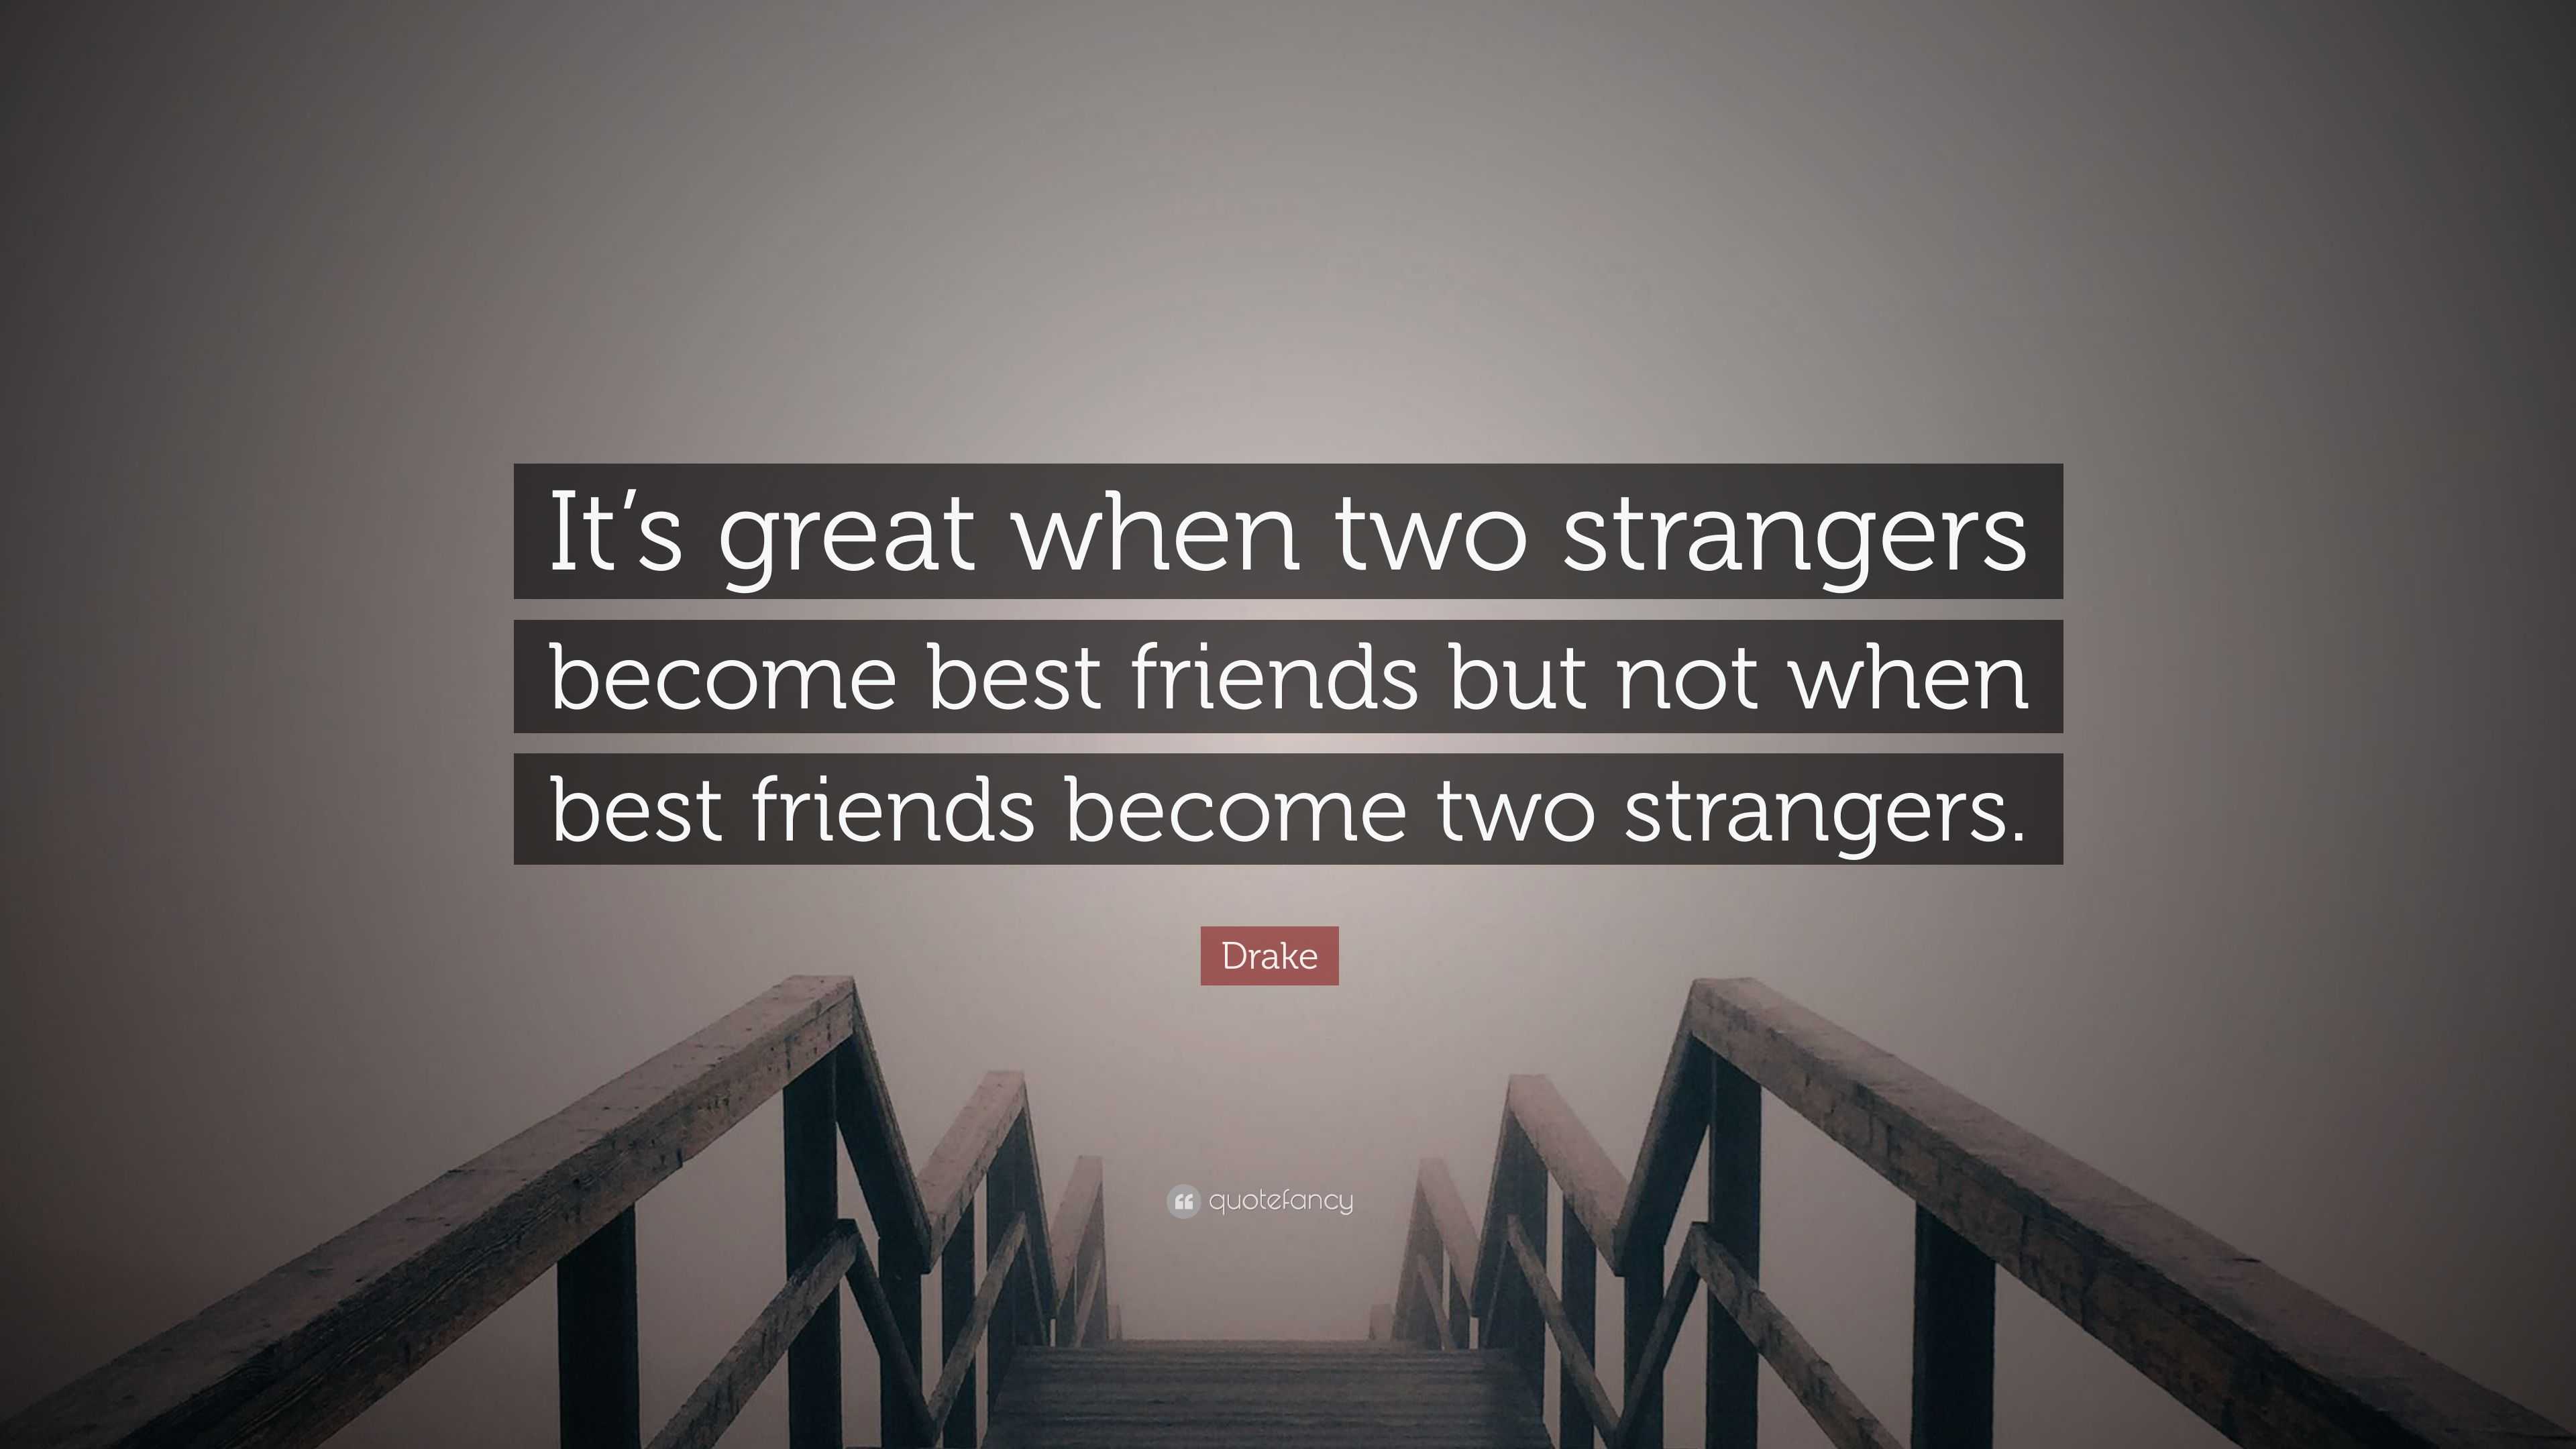 TOP 17 STRANGERS AND FRIENDS QUOTES